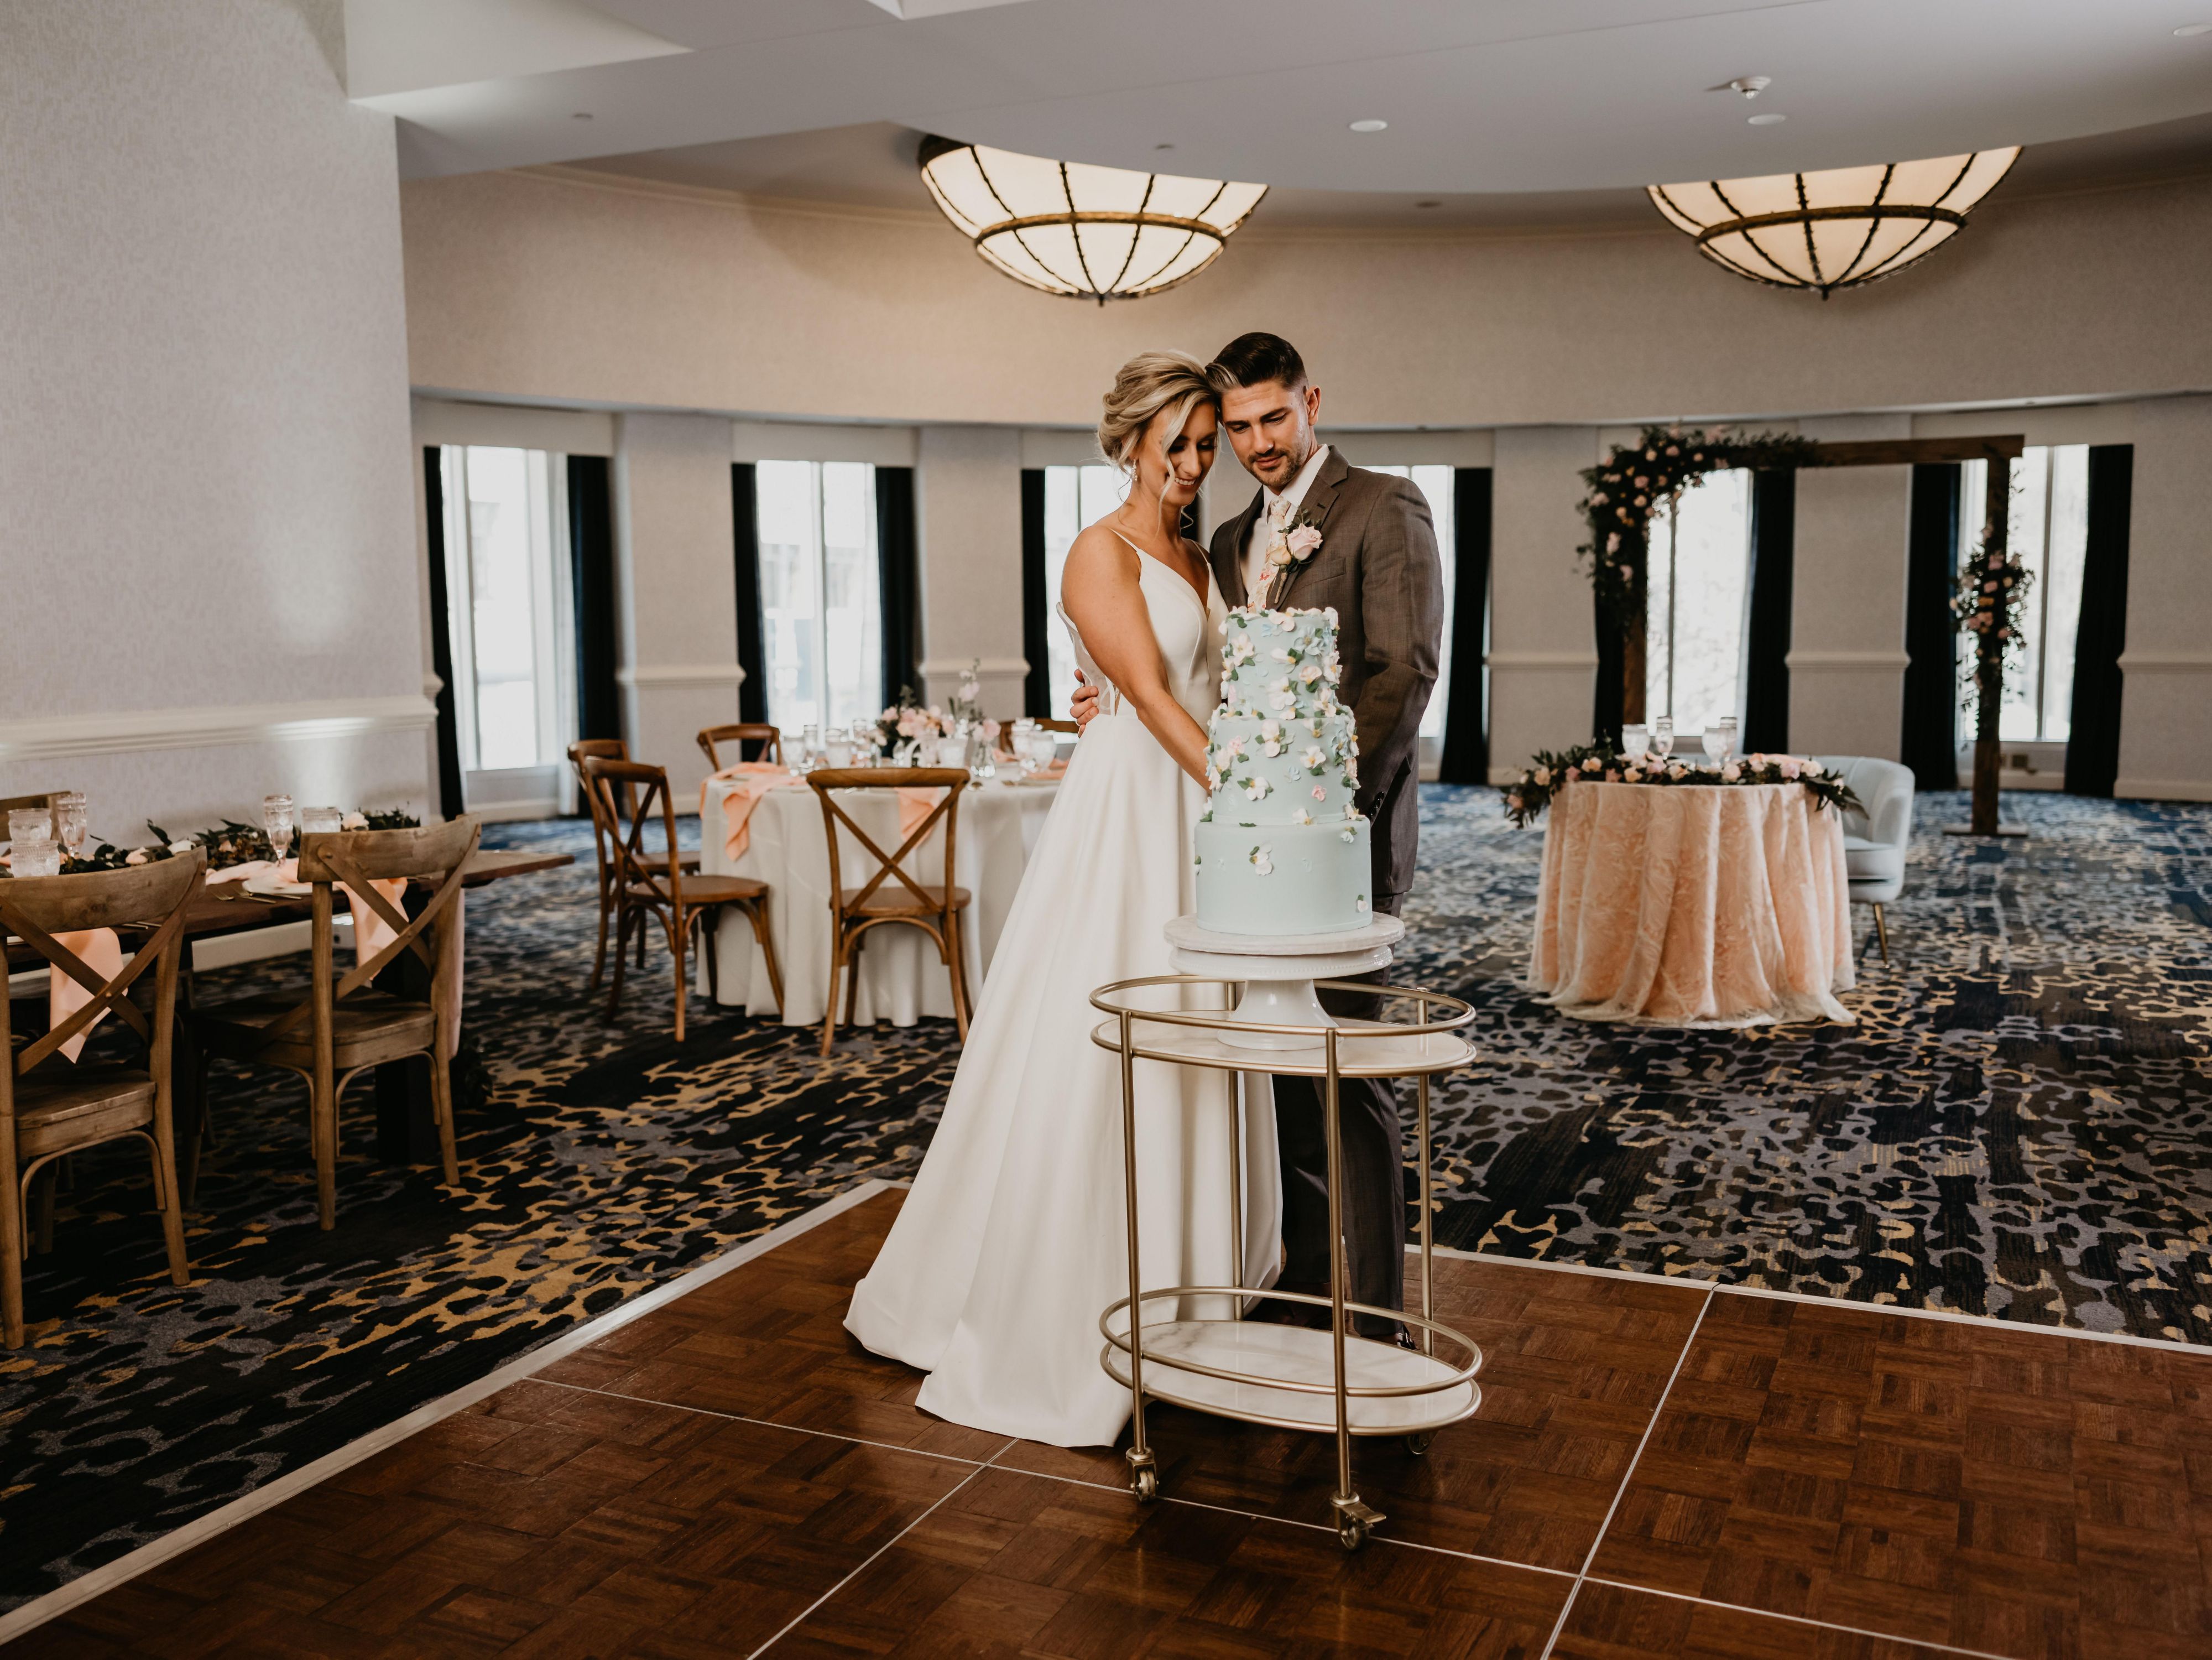 Book your June 2024 wedding at Crowne Plaza Cleveland and receive up to 250,000 IHG Business Rewards points (a $1200 value!) to use towards your dream honeymoon anywhere IHG hotels are located like Mexico, Aruba, Jamaica and more. Minimum F&B spend required. Don't miss out on this exclusive honeymoon offer for June weddings.